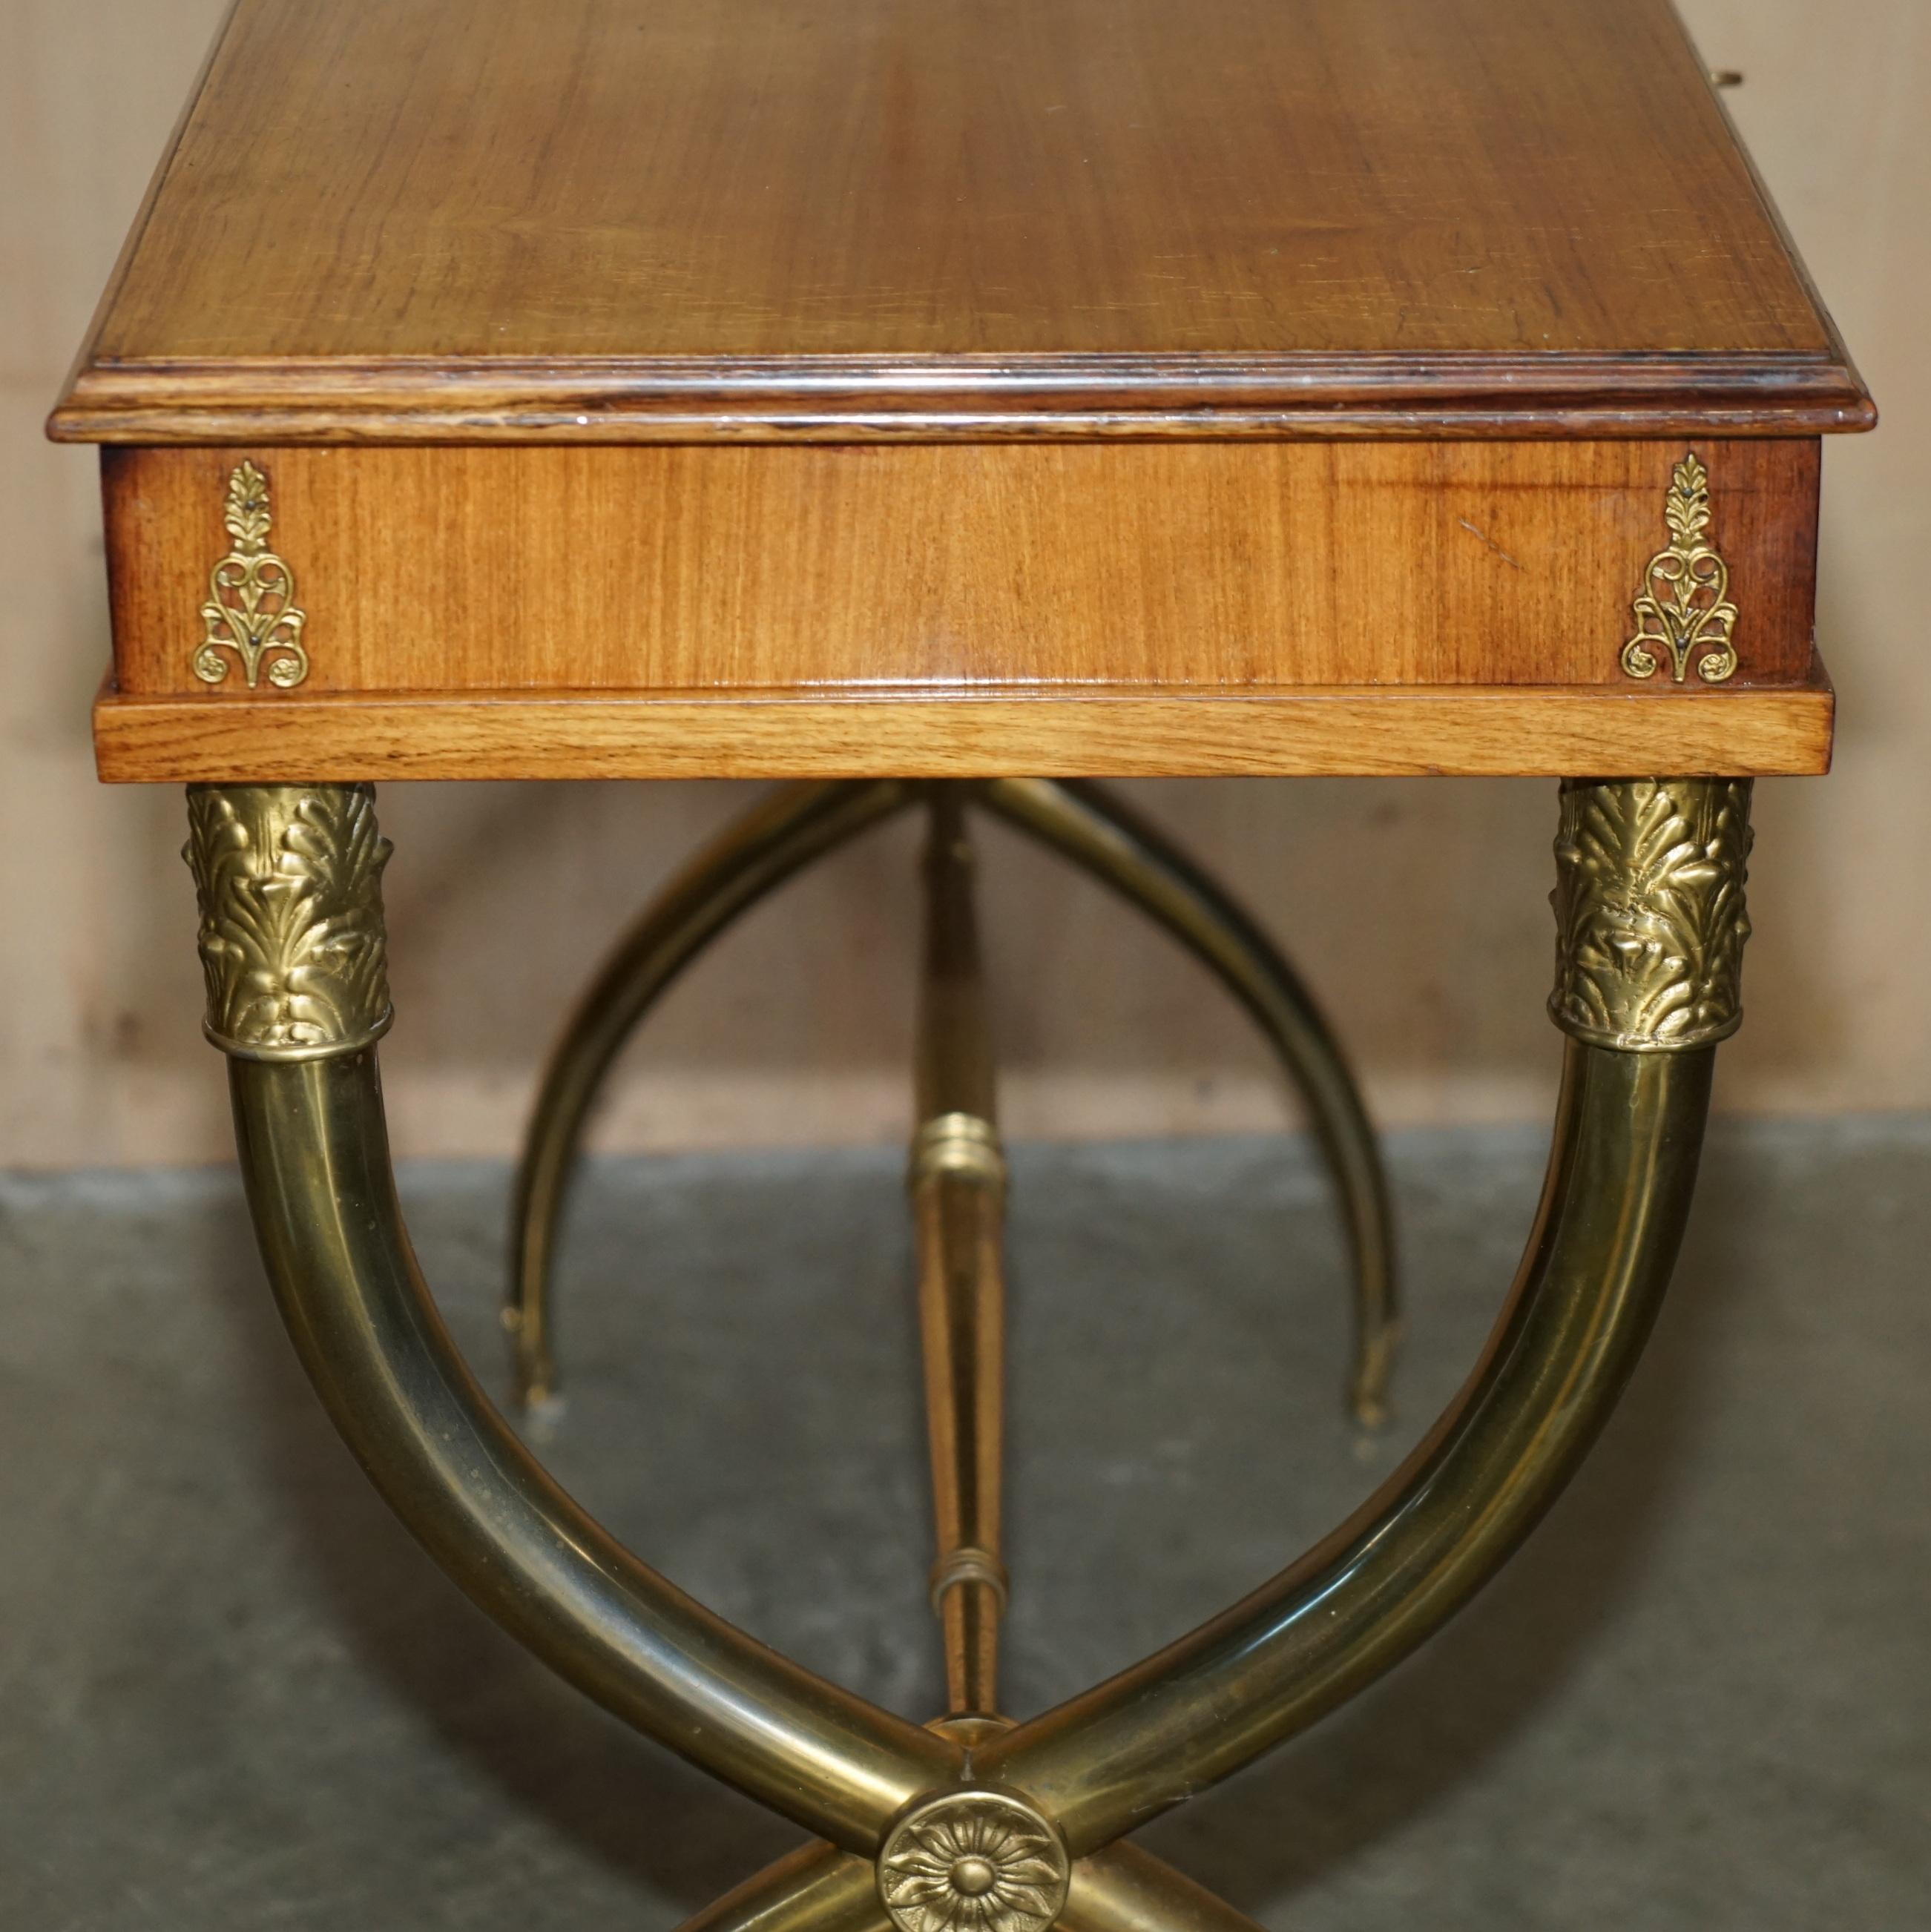 STUNNING REGENCY STYLE NEOCLASSICAL BRASS & WALNUT WRiTING TABLE DESK CIRCA 1920 For Sale 9